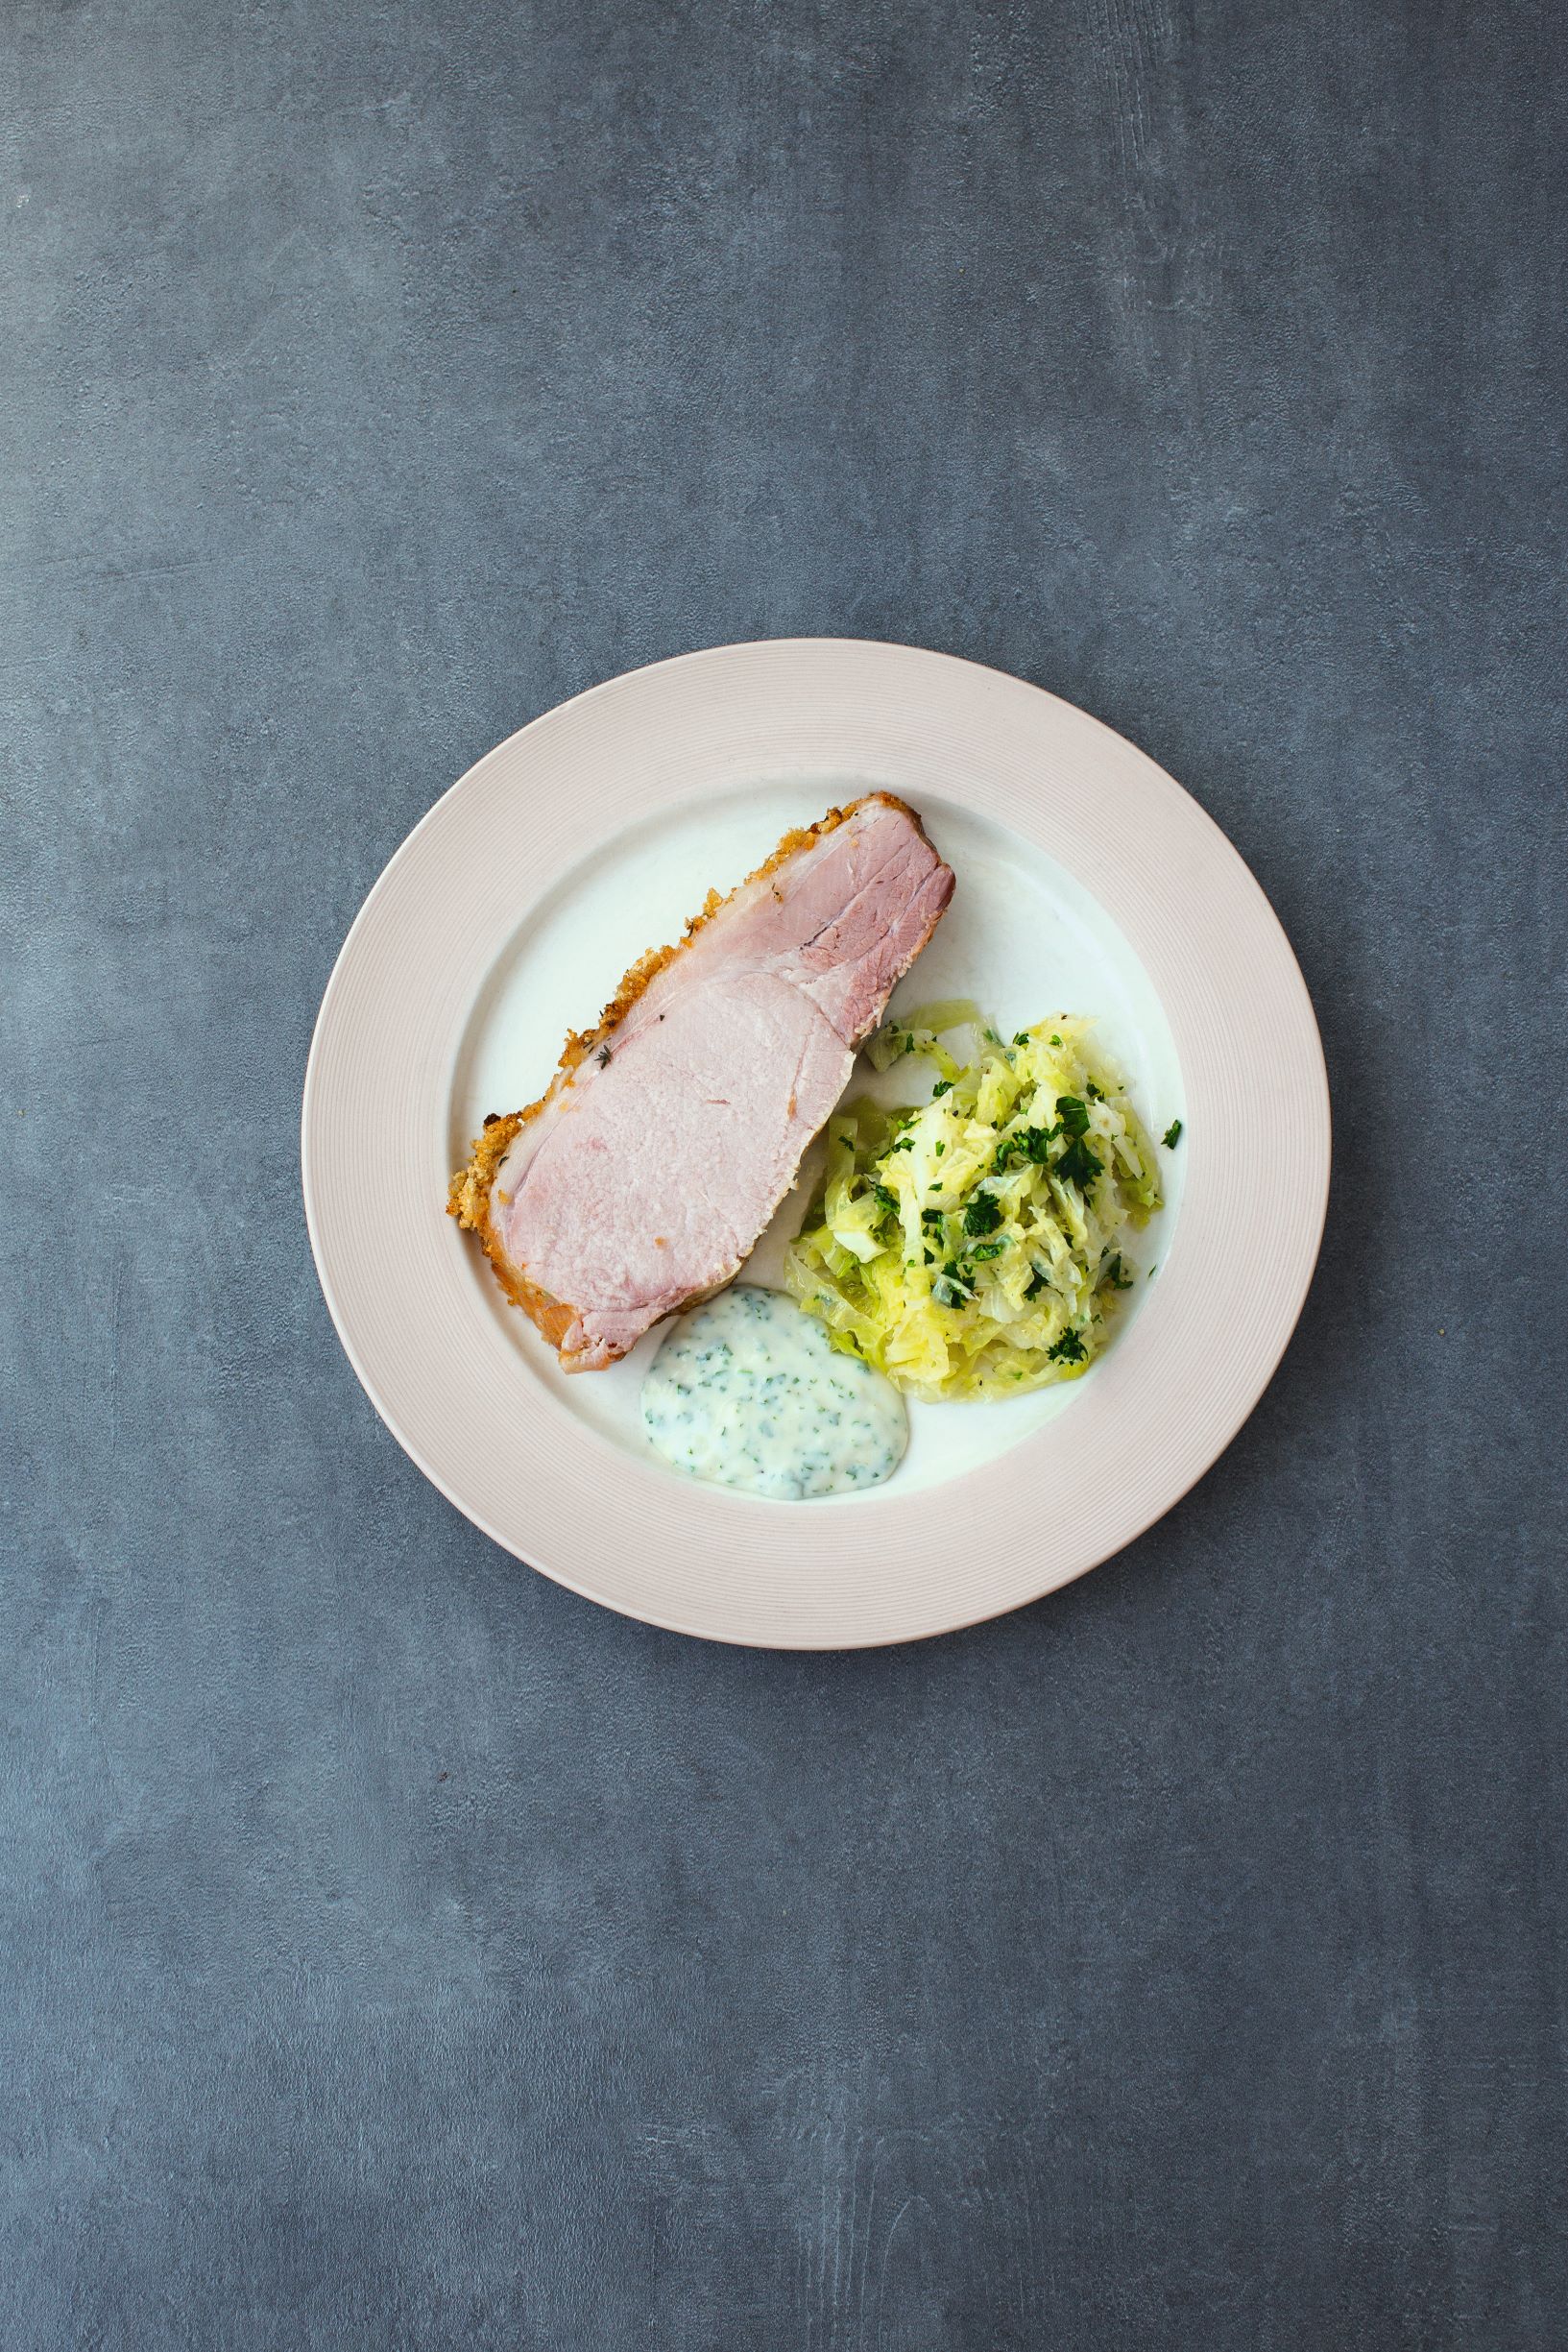 Bacon and Cabbage with Parsley Sauce